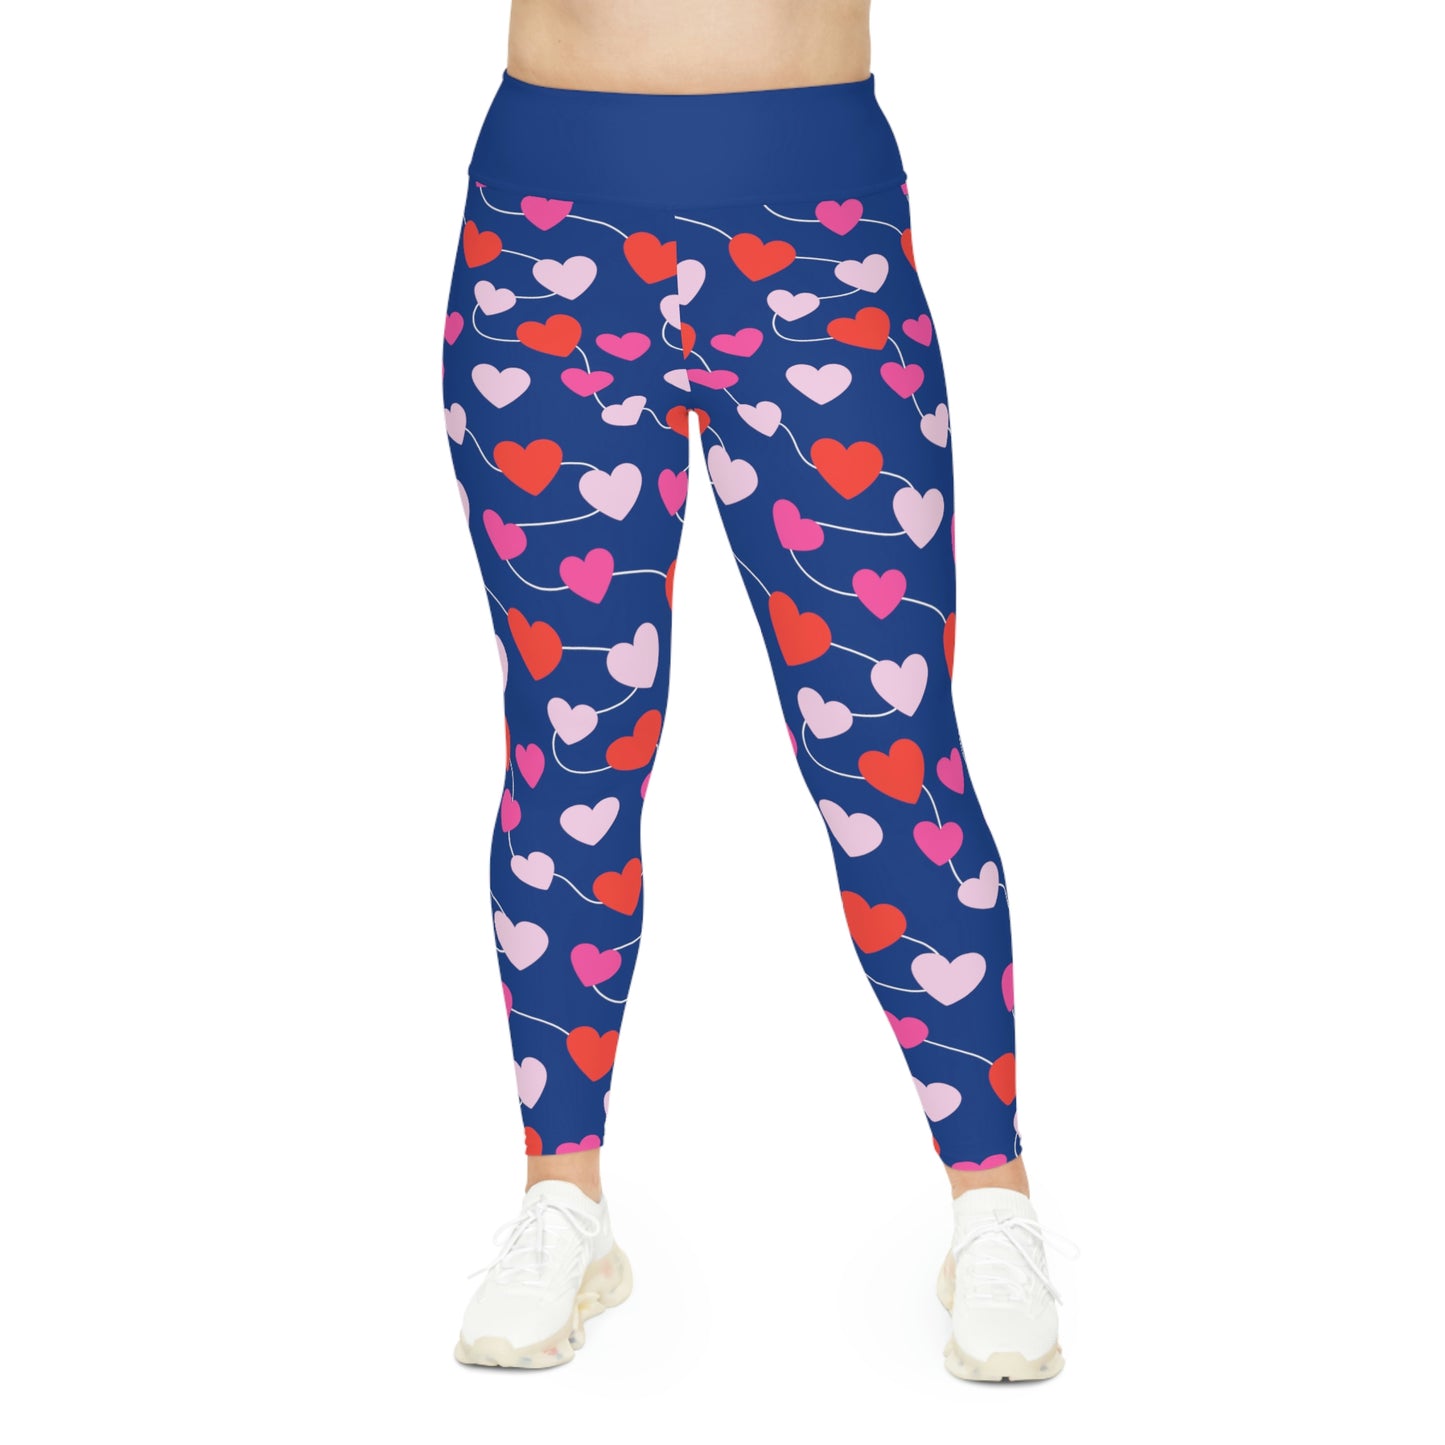 Valentines Day Gift For Her Plus Size Leggings . One of a Kind Workout Activewear tights for Mothers Day, Girlfriend, Gift for Her